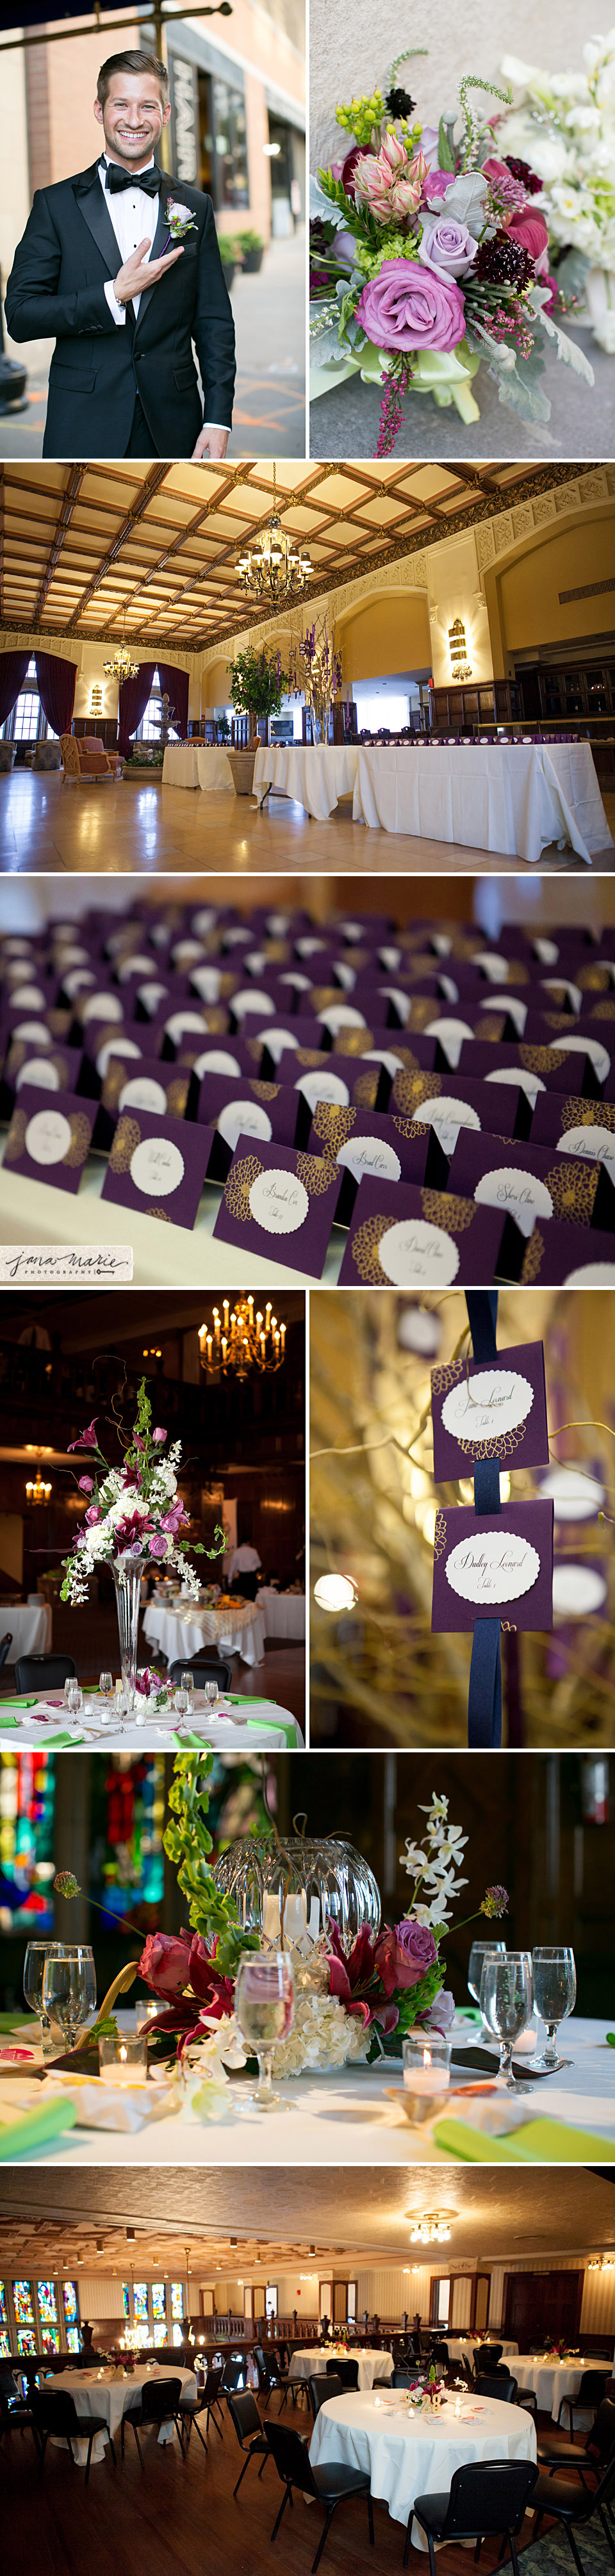 Wedding details, reception room, Baltimore Club KC, name cards, tall centerpieces, Jana Marie Photography